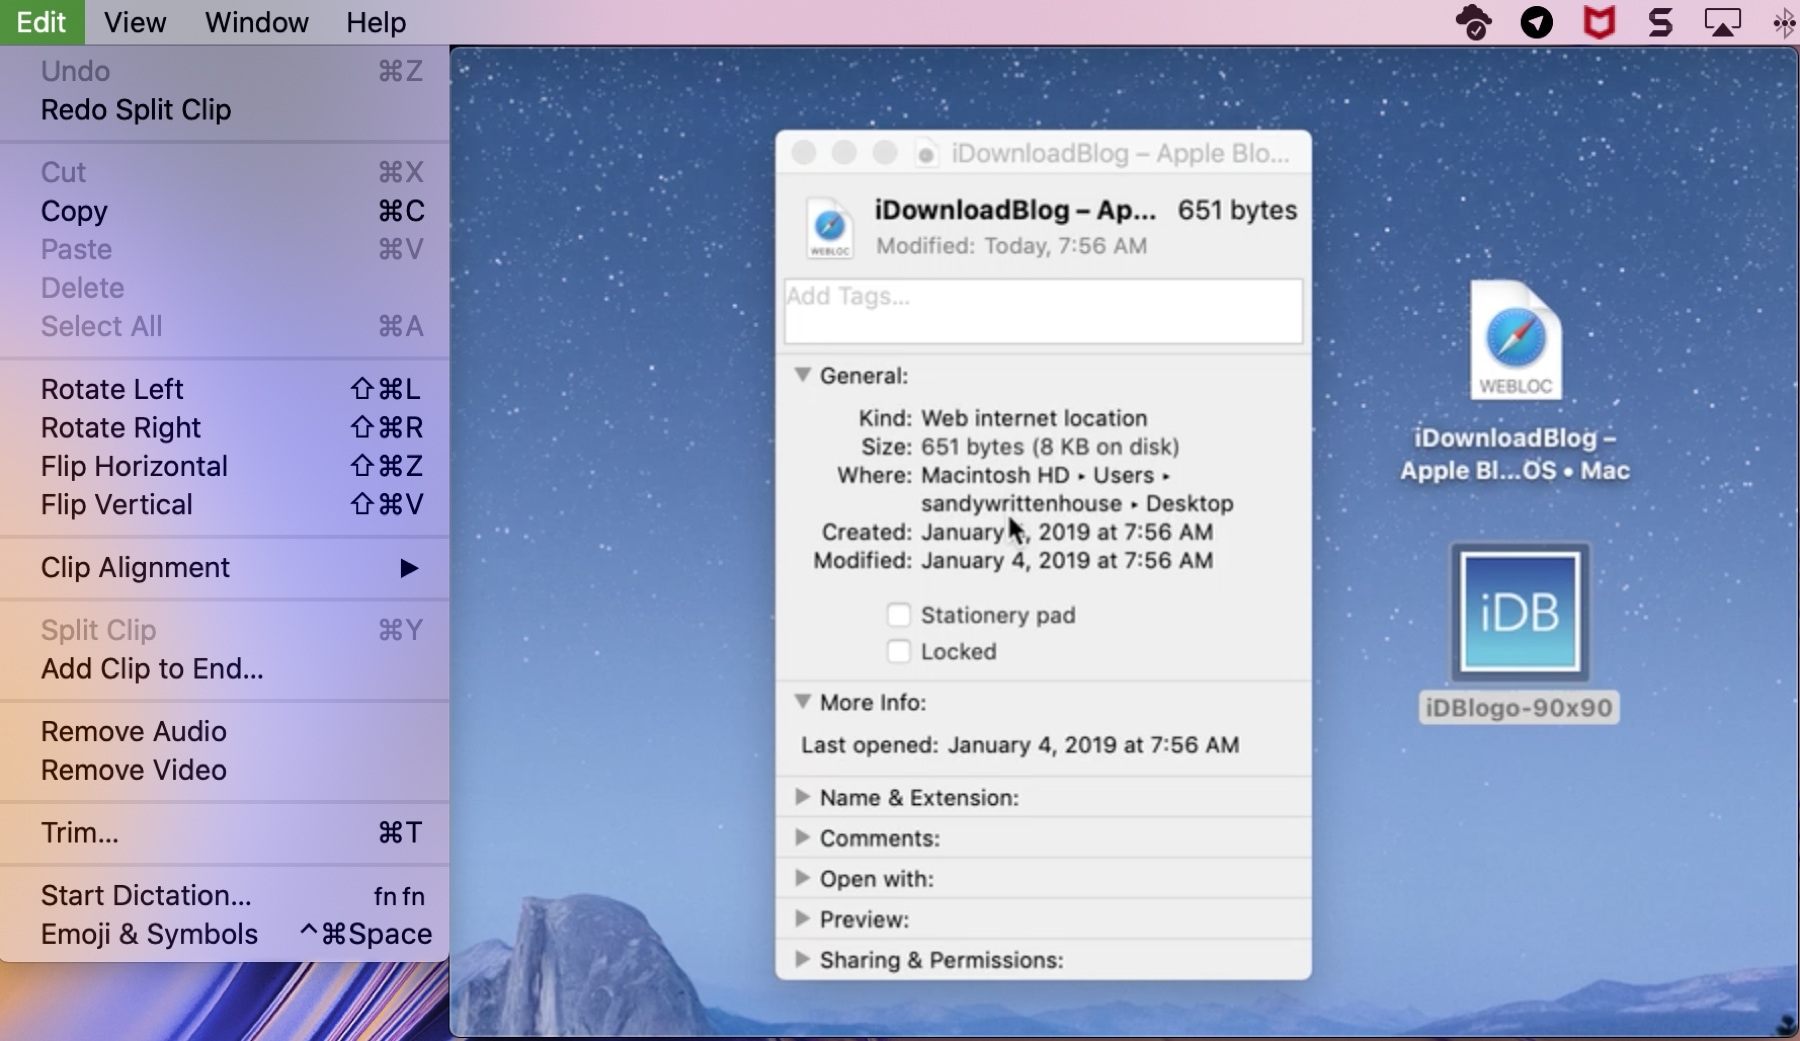 download quicktime player for mac